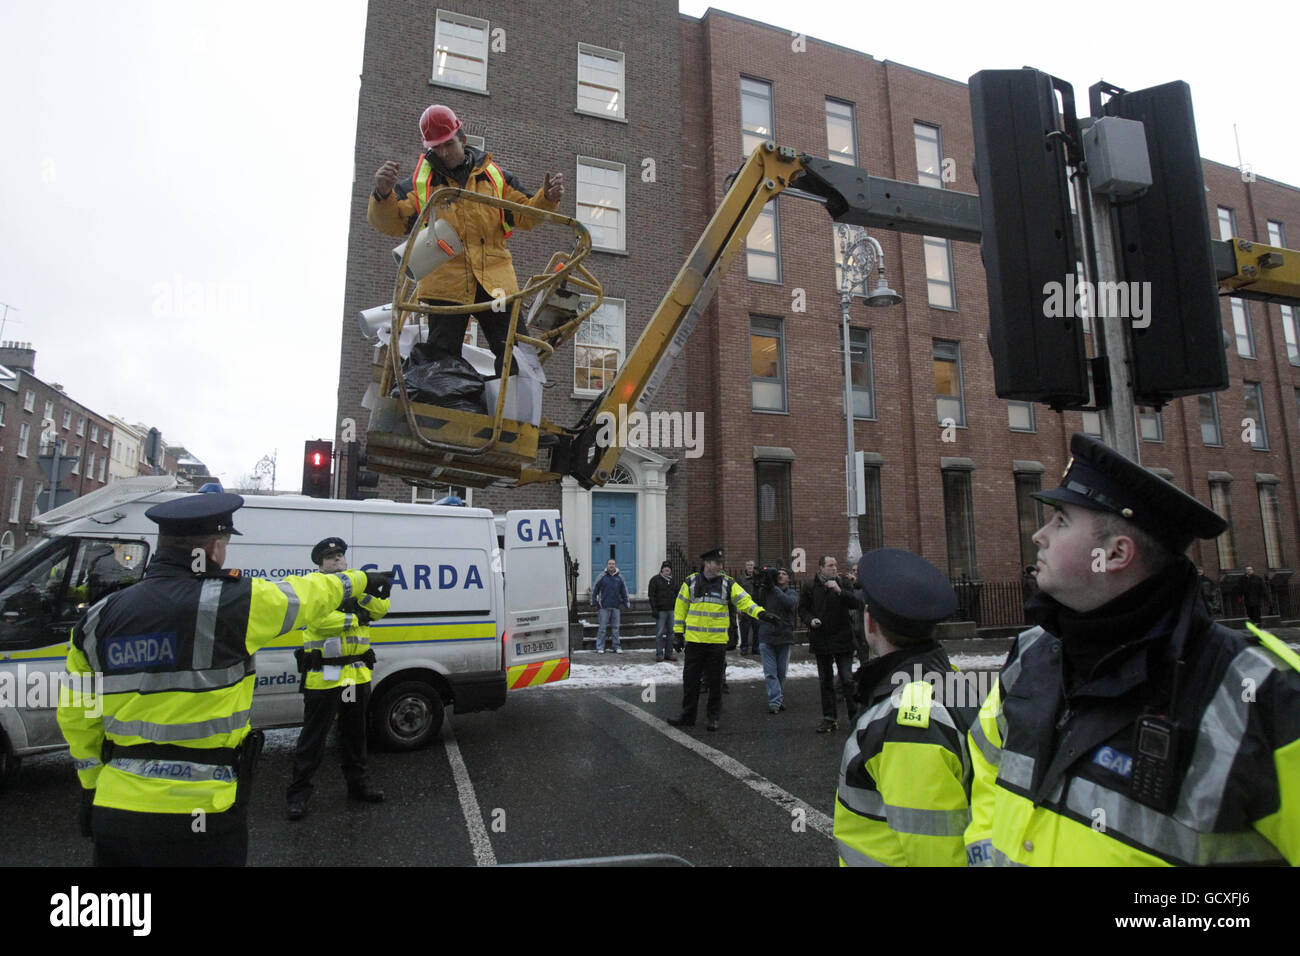 A man uses a cherry picker covered with a number of slogans attacking politicians and the banking sector to protest outside the gates of Leinster House, Dublin, converses with gardai on Budget day. Stock Photo